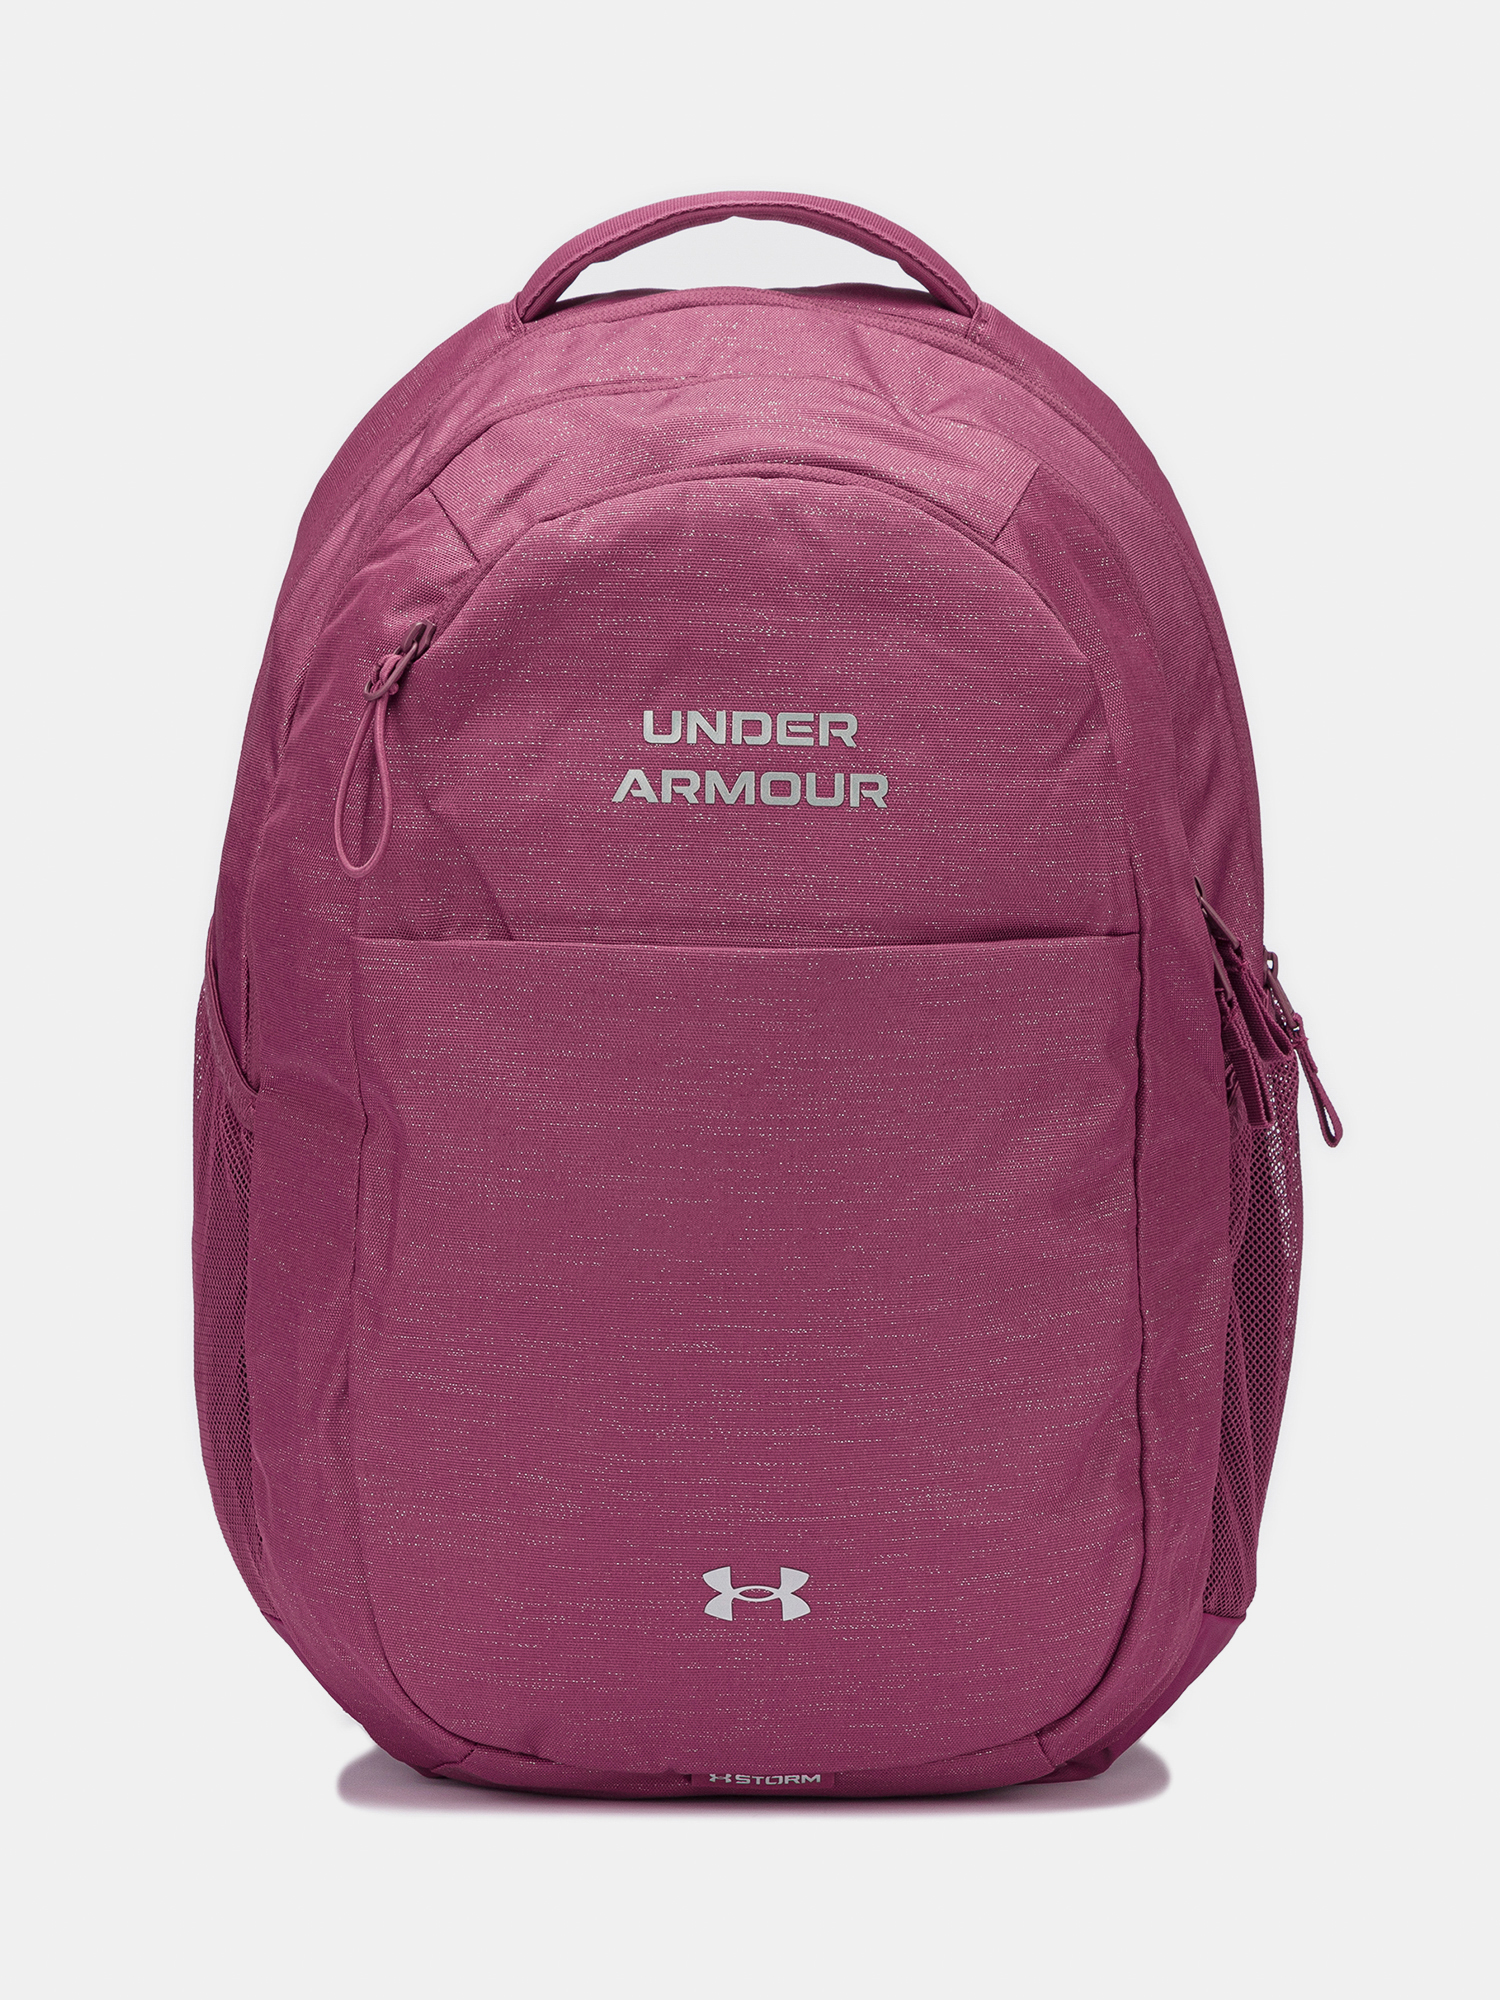 Under Armour Backpack Hustle Signature Backpack-PNK - Women's